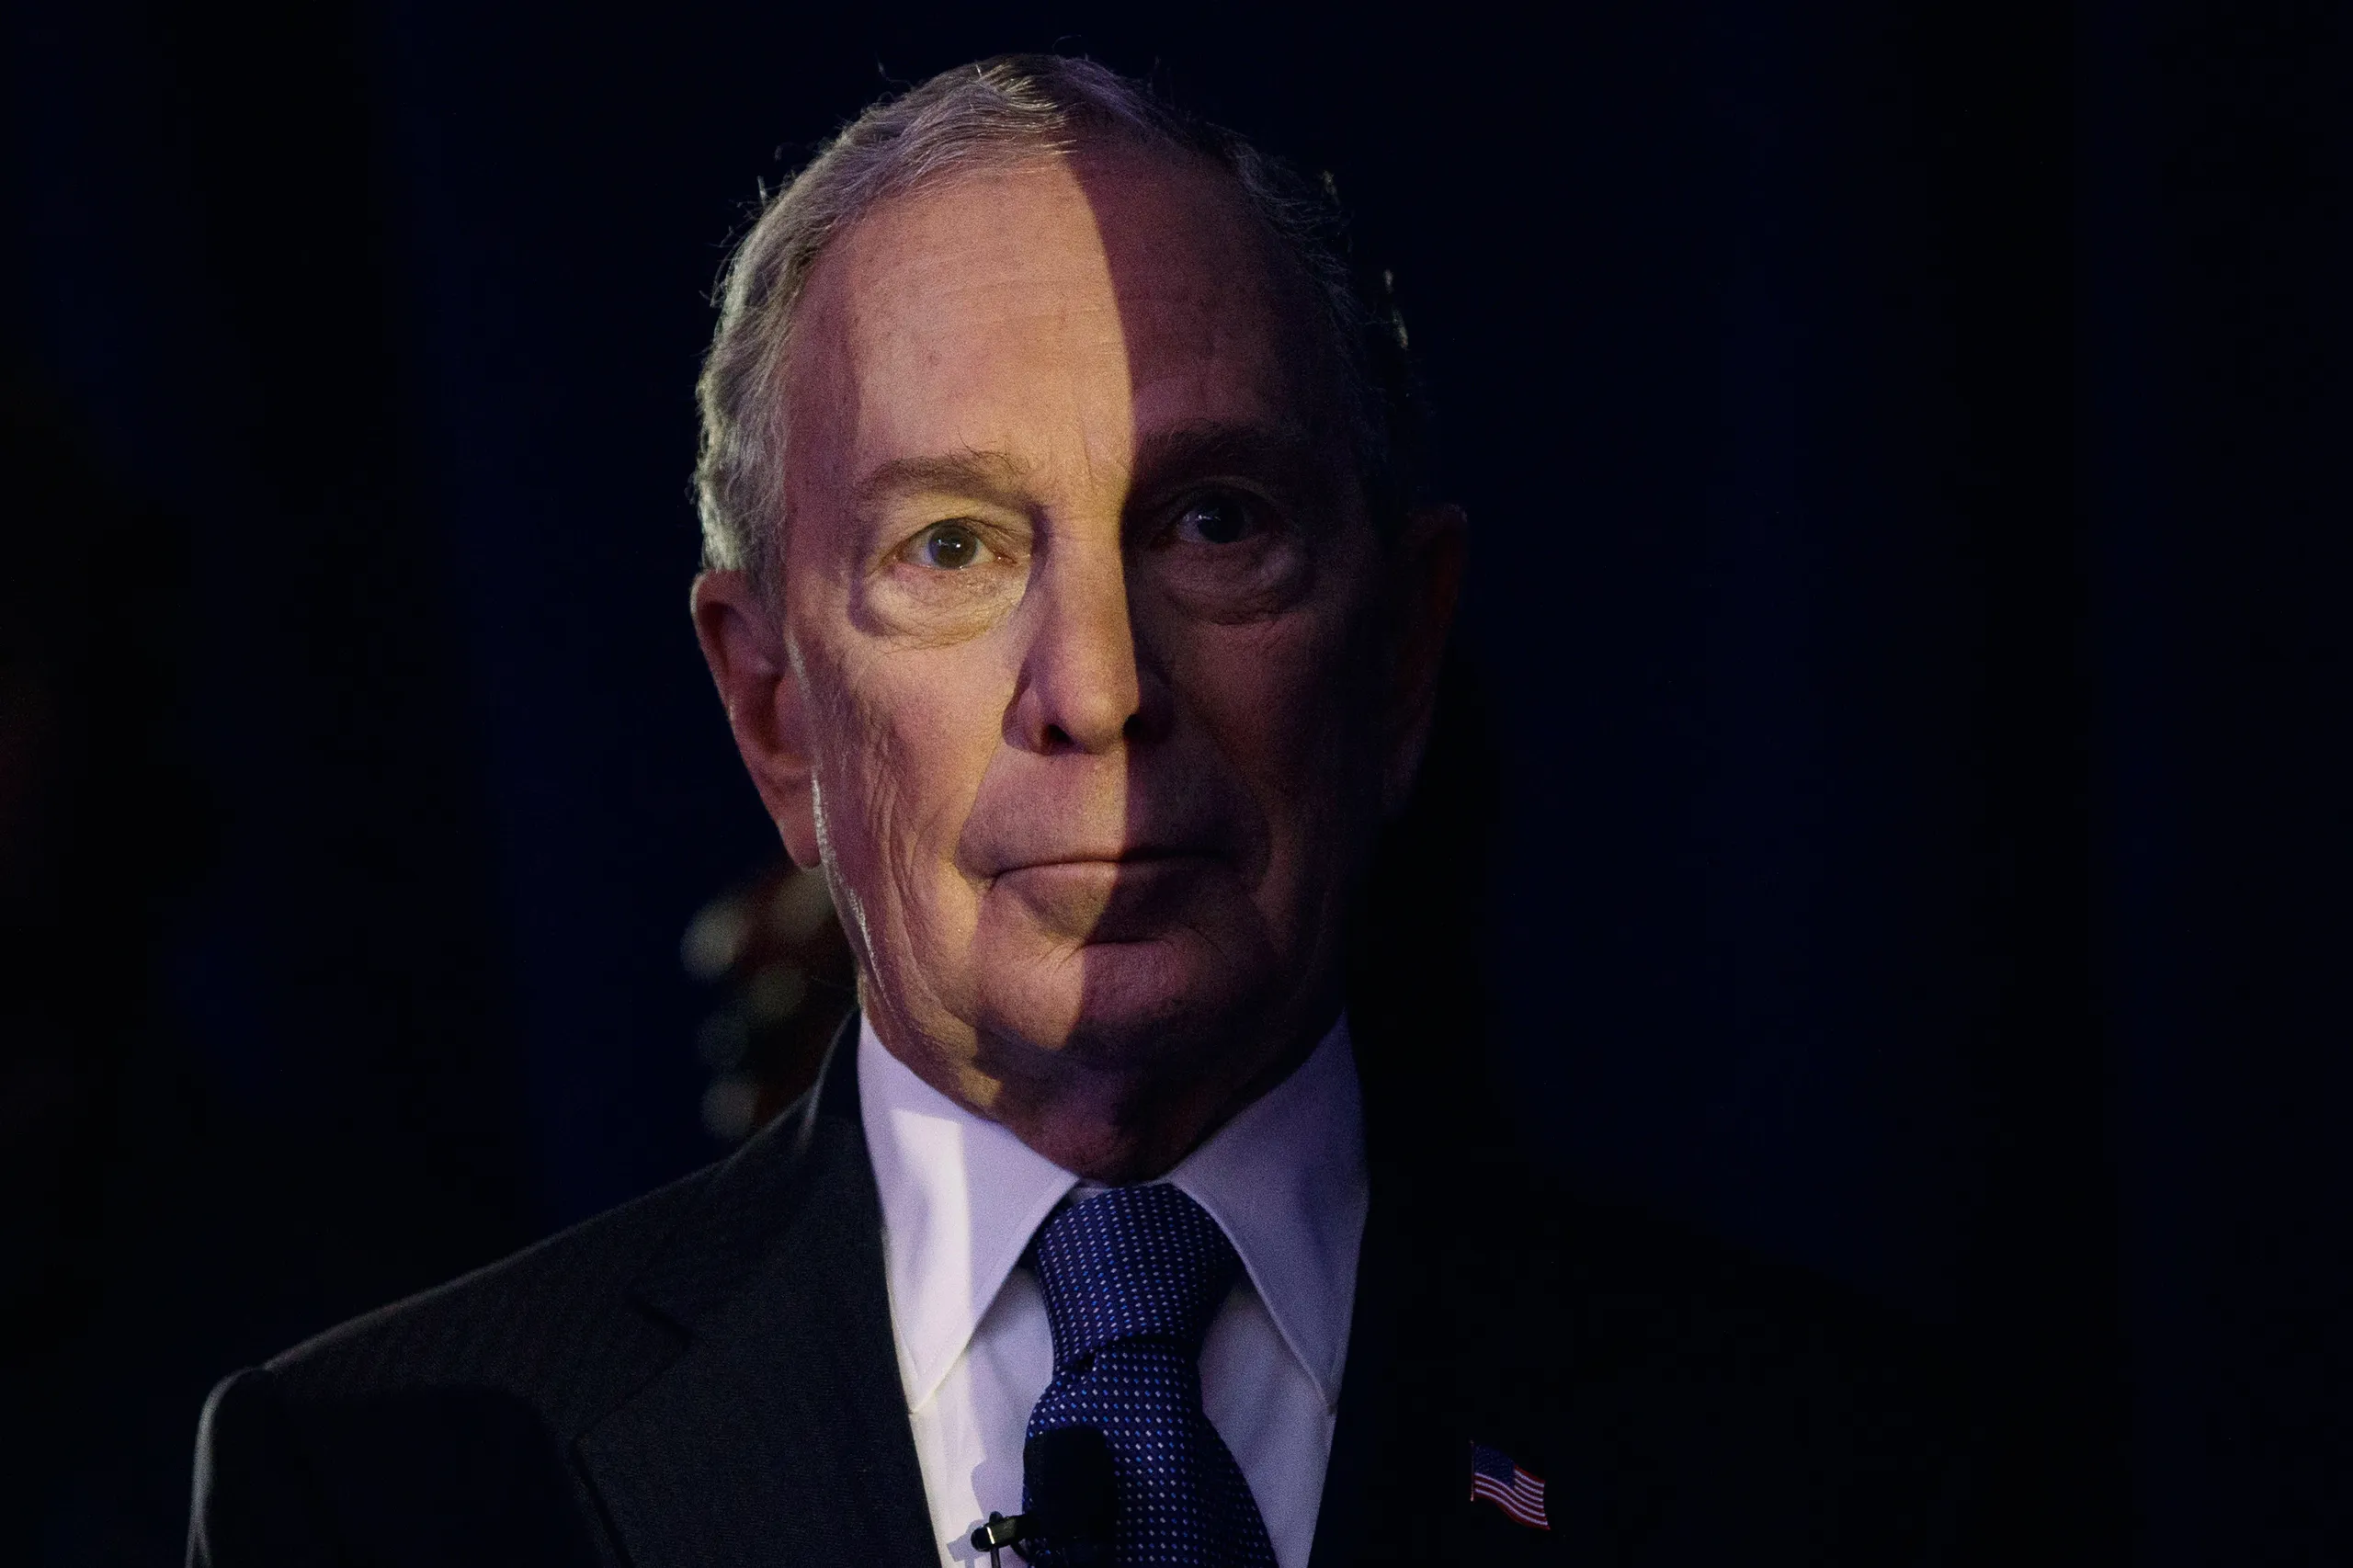 What Michael Bloomberg thinks about venture capital